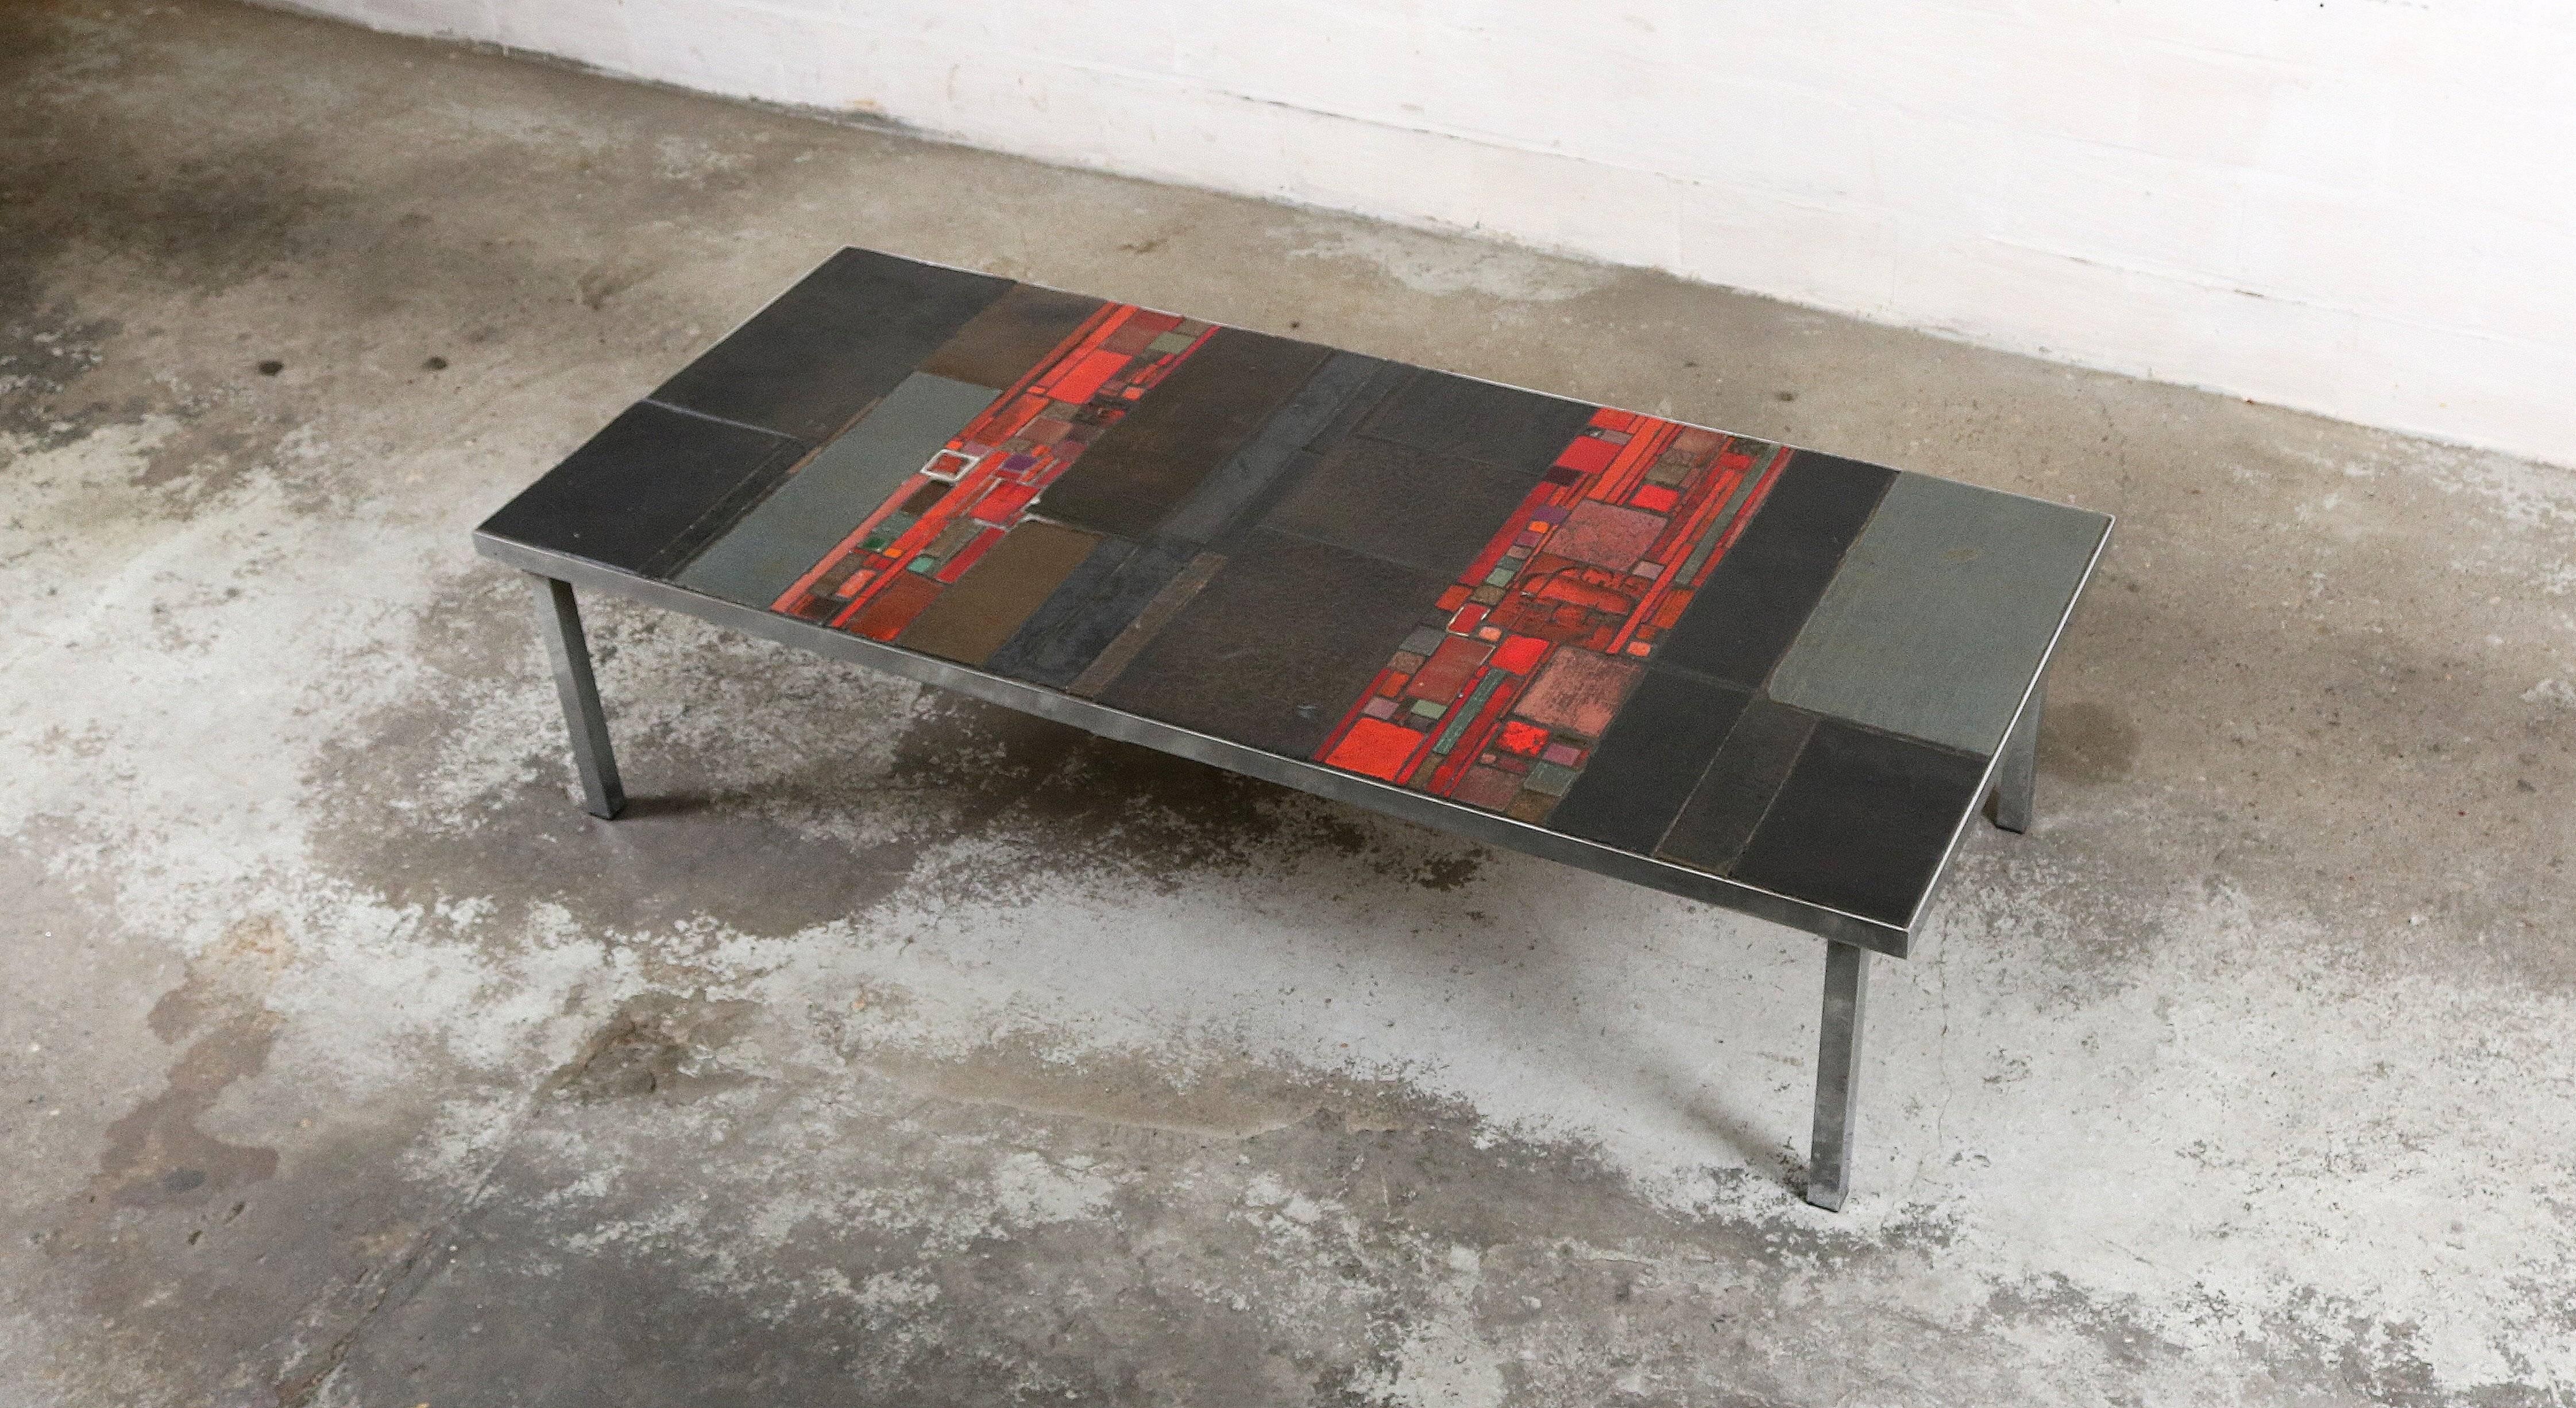 Coffee table designer and ceramic artist Pia Manu.
The table is made of black ceramic tiles and red mosaic pieces.
Has a sleek chrome base.